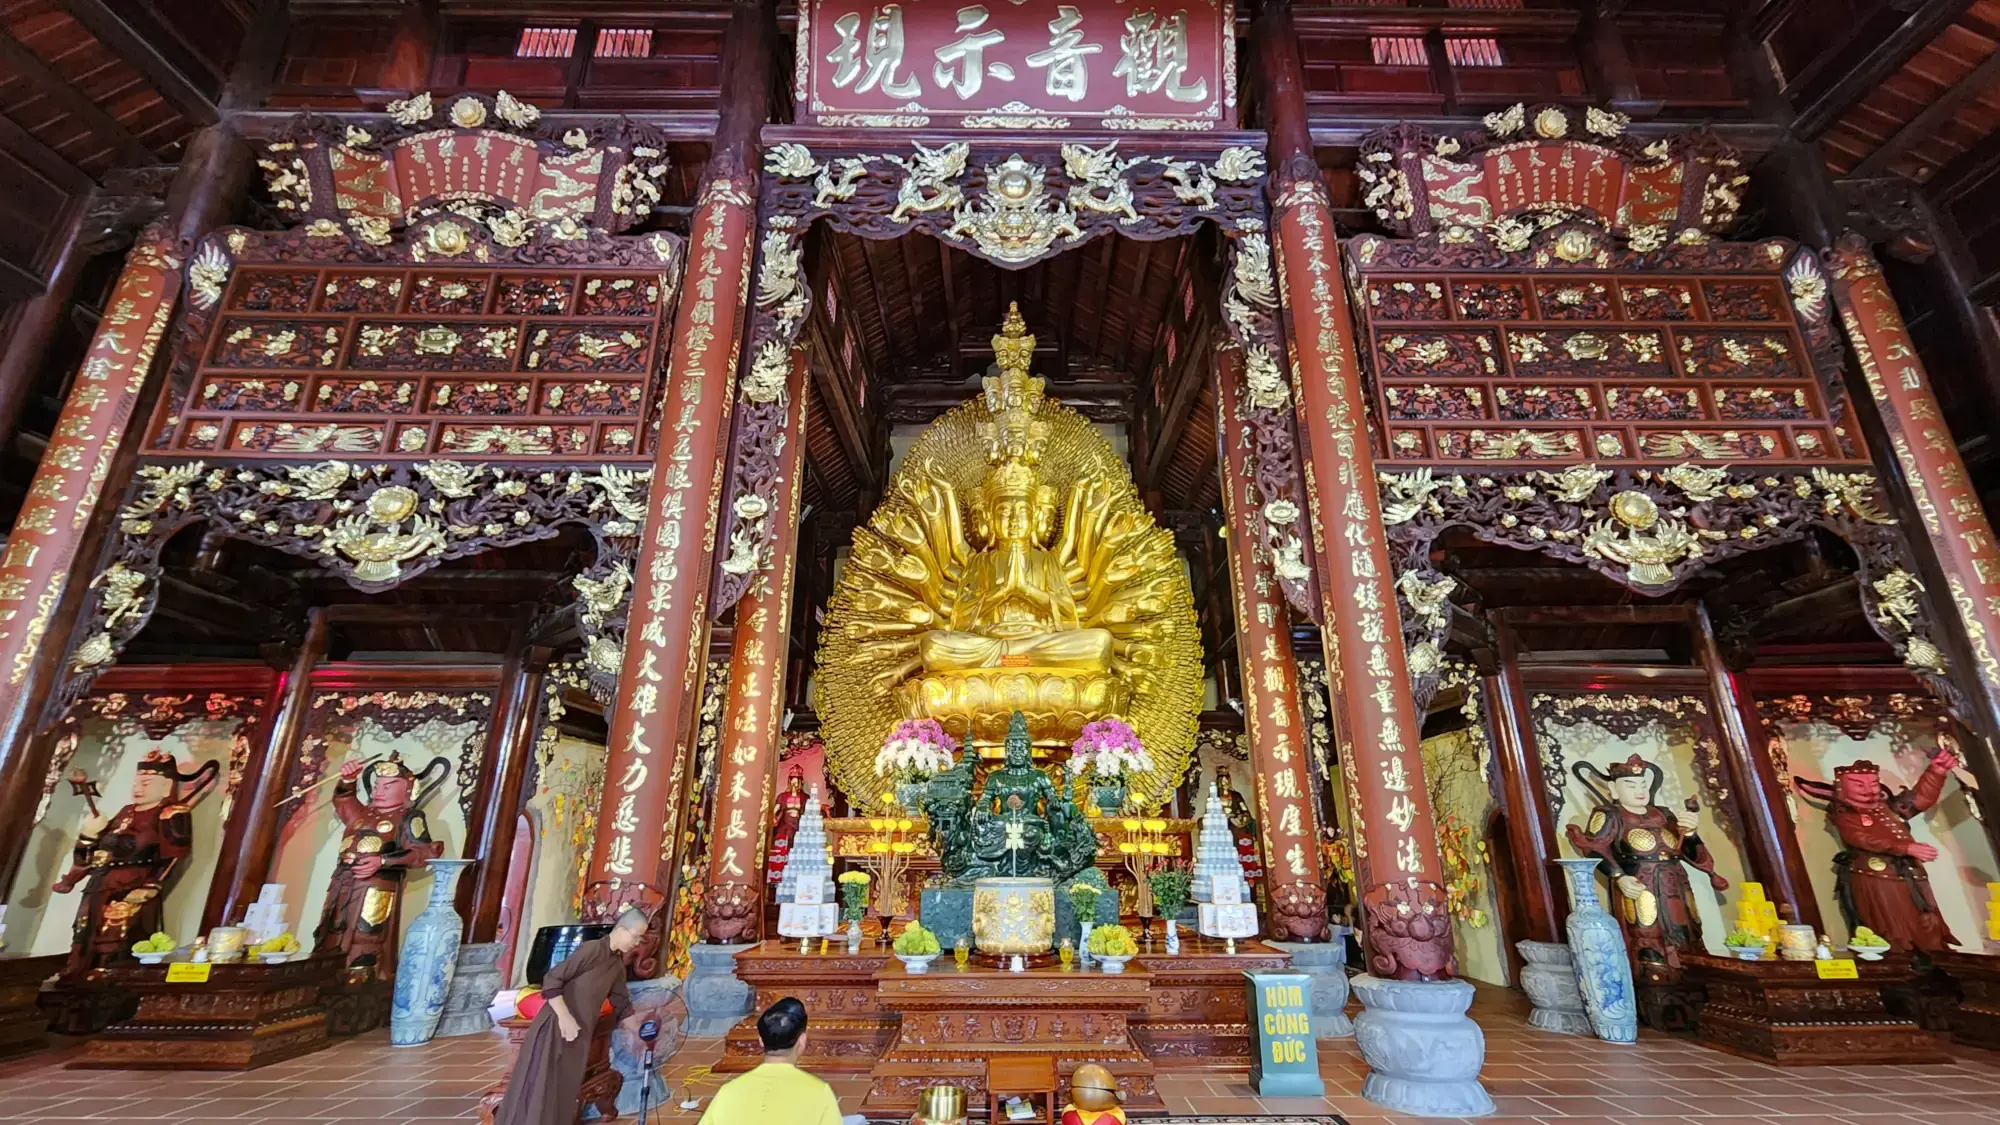 Tan Vien Pagoda - temple on the hill